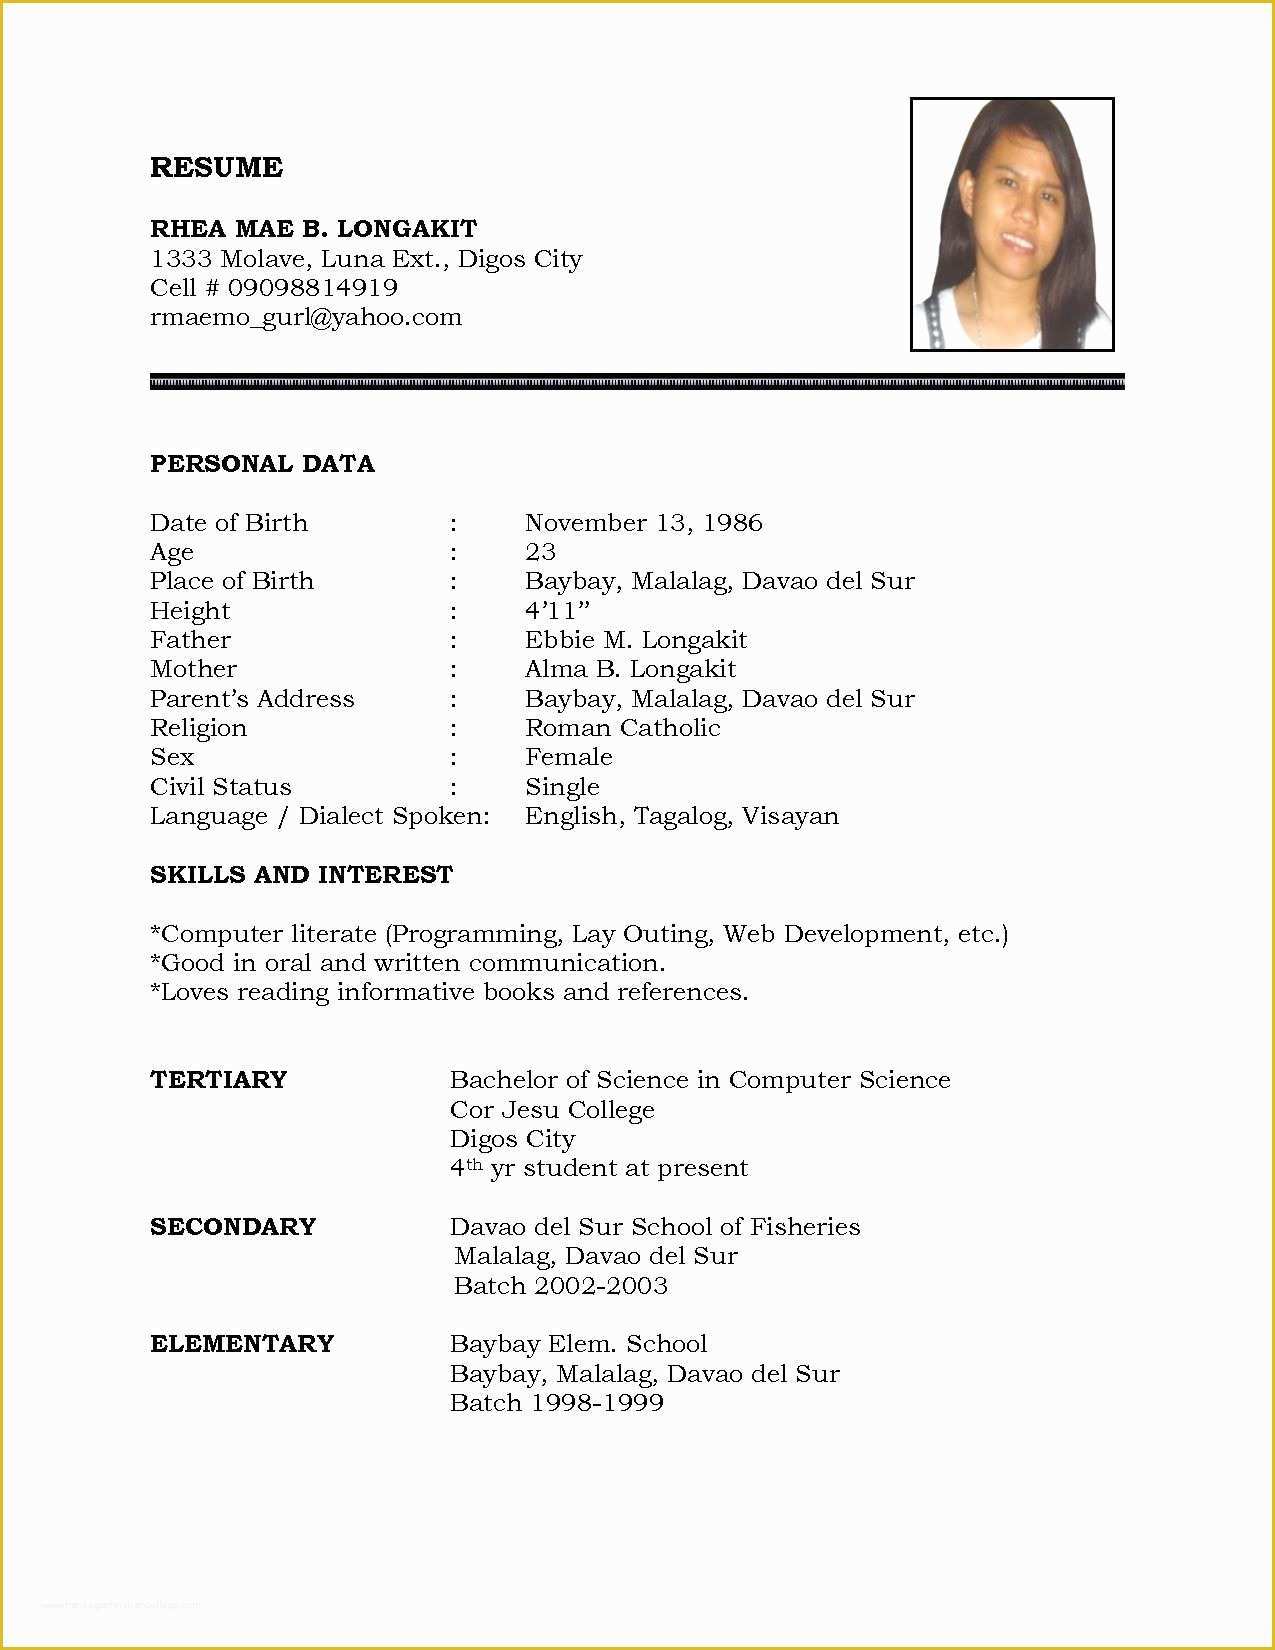 Easy Resume Template Free Of Resume Sample Simple De9e2a60f the Simple format Resume